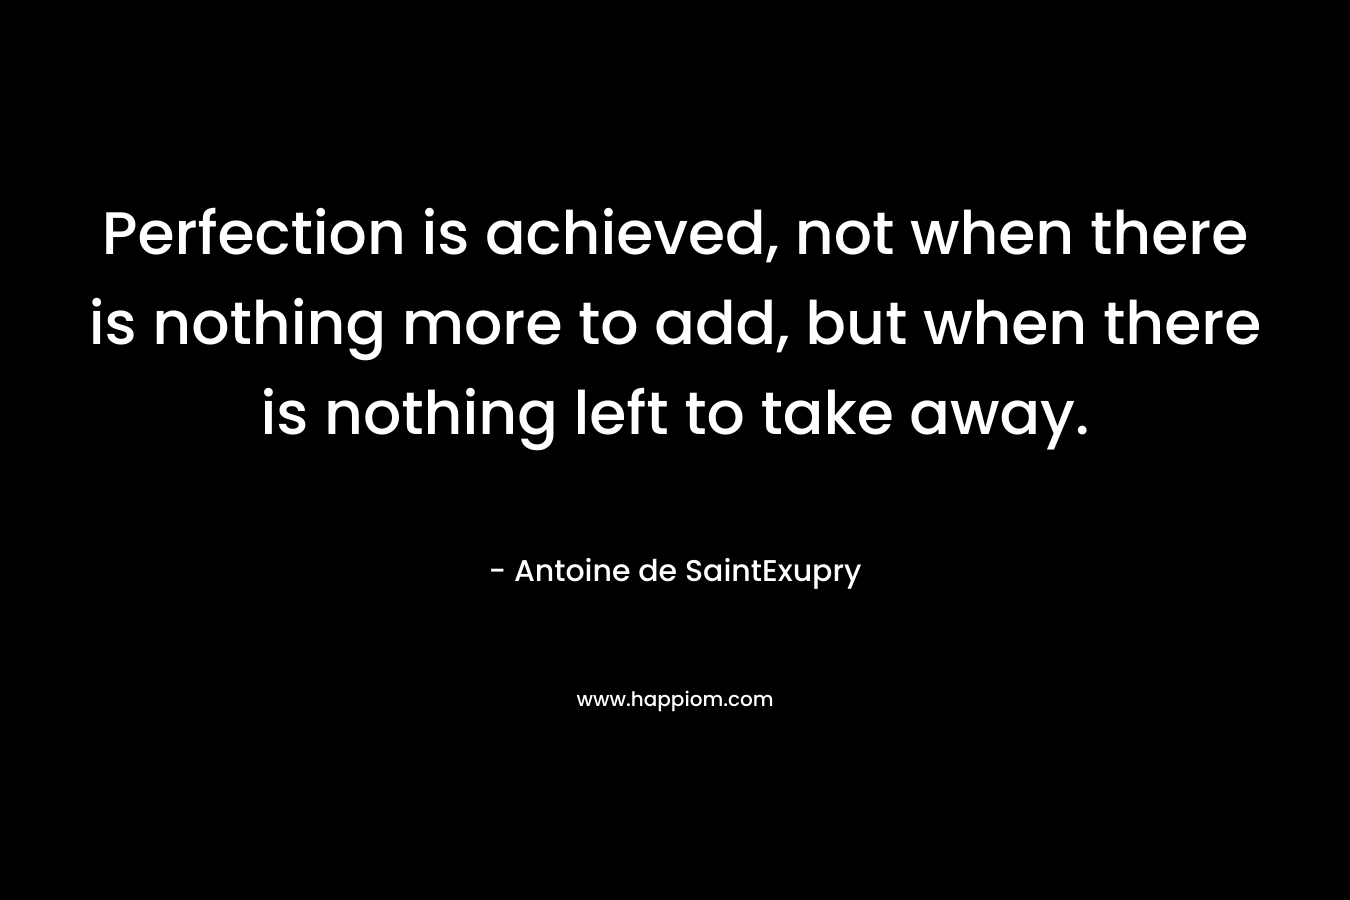 Perfection is achieved, not when there is nothing more to add, but when there is nothing left to take away. – Antoine de SaintExupry